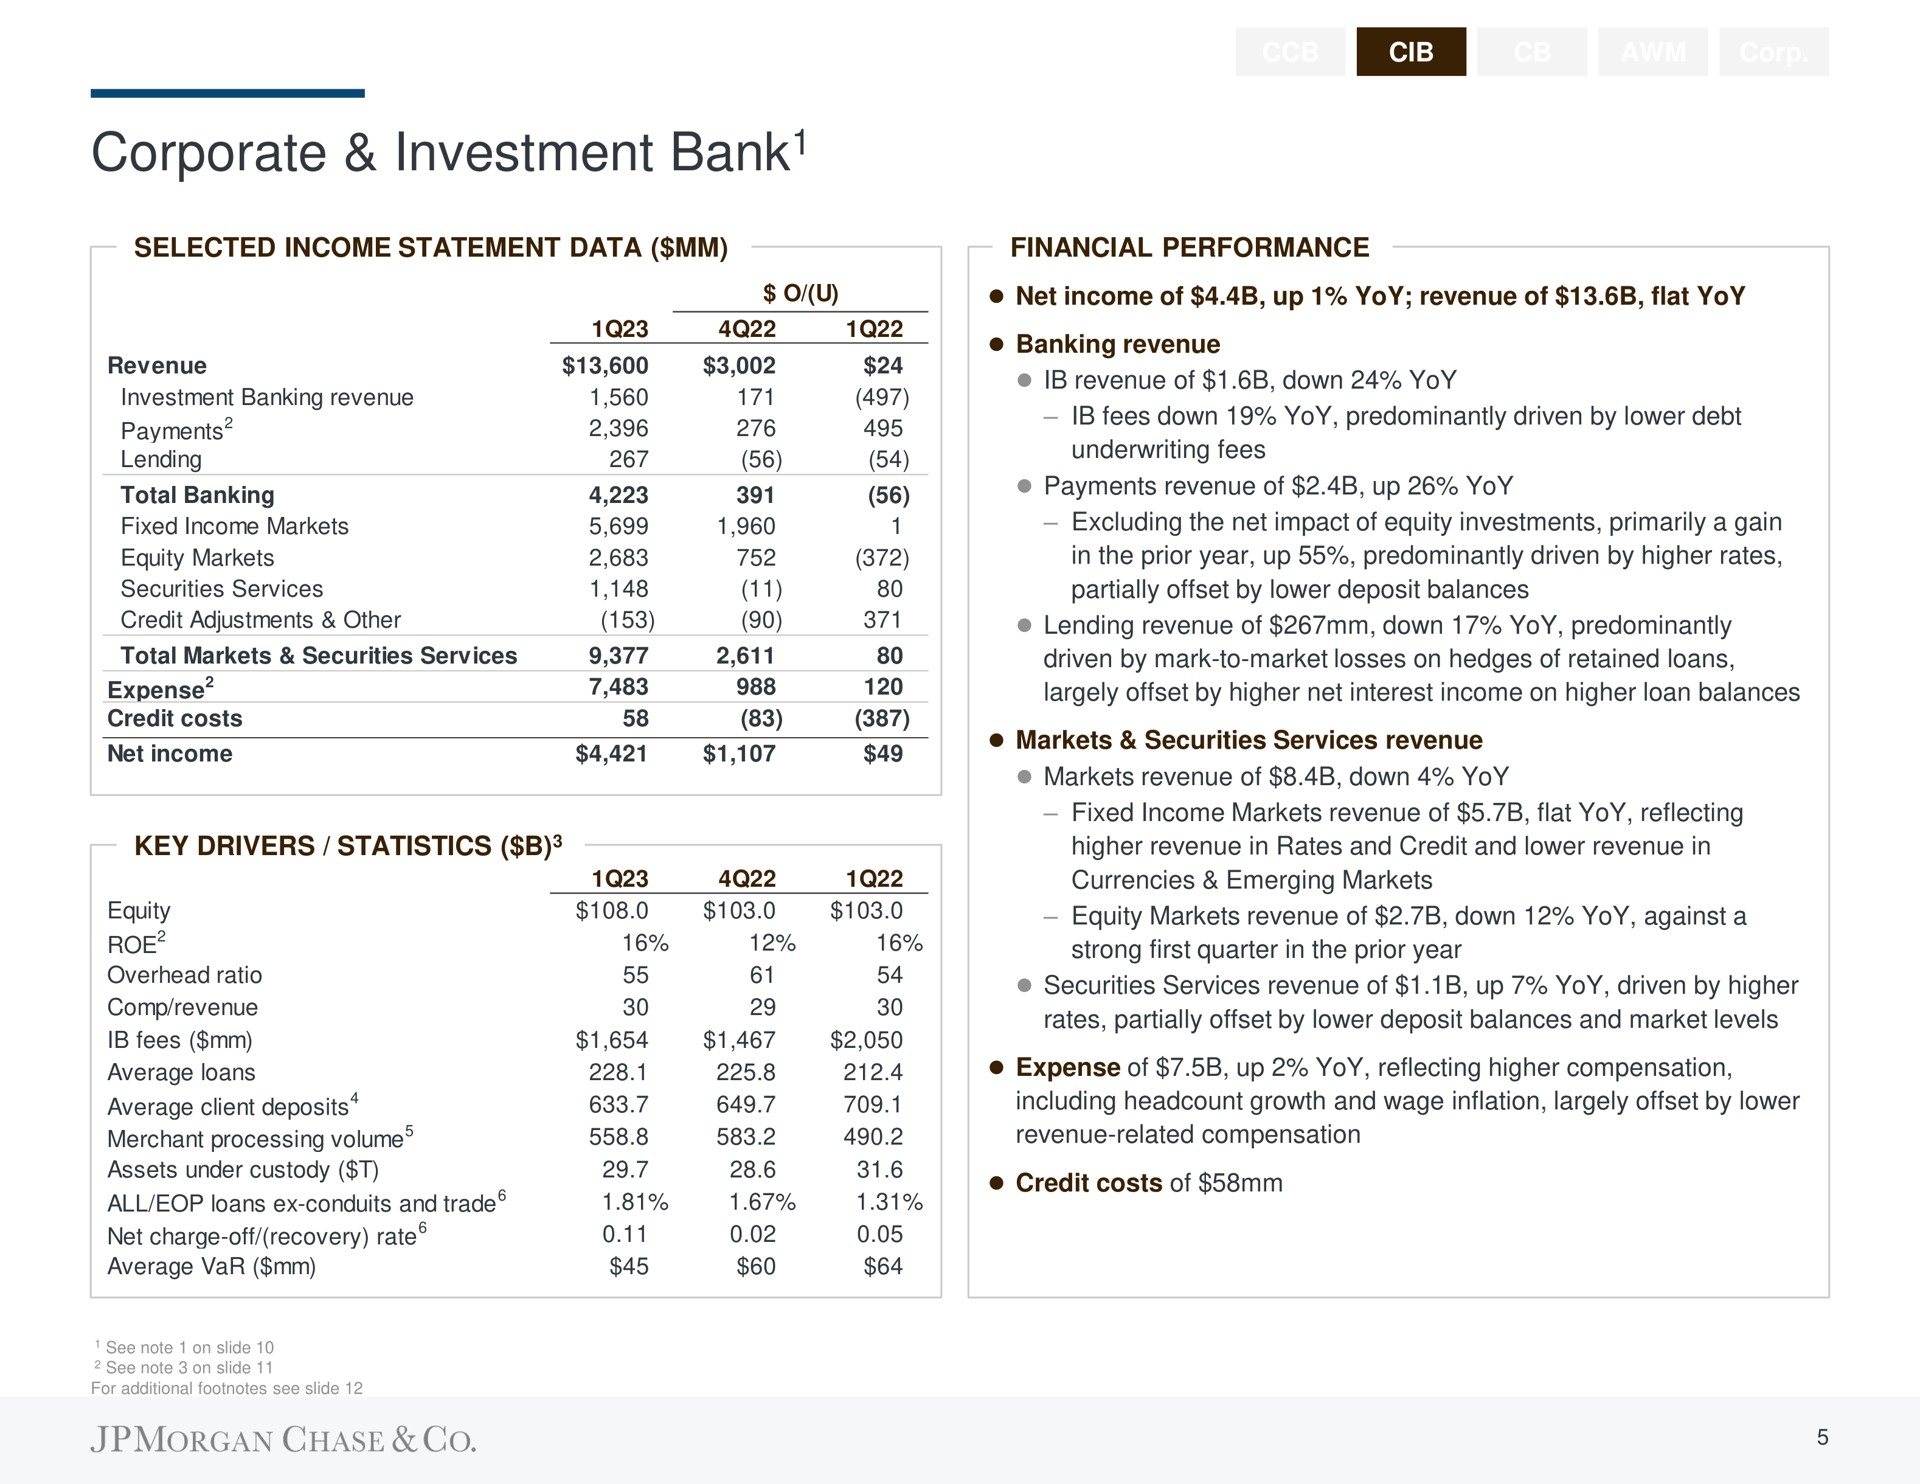 corporate investment bank bank revenue of down yoy | J.P.Morgan